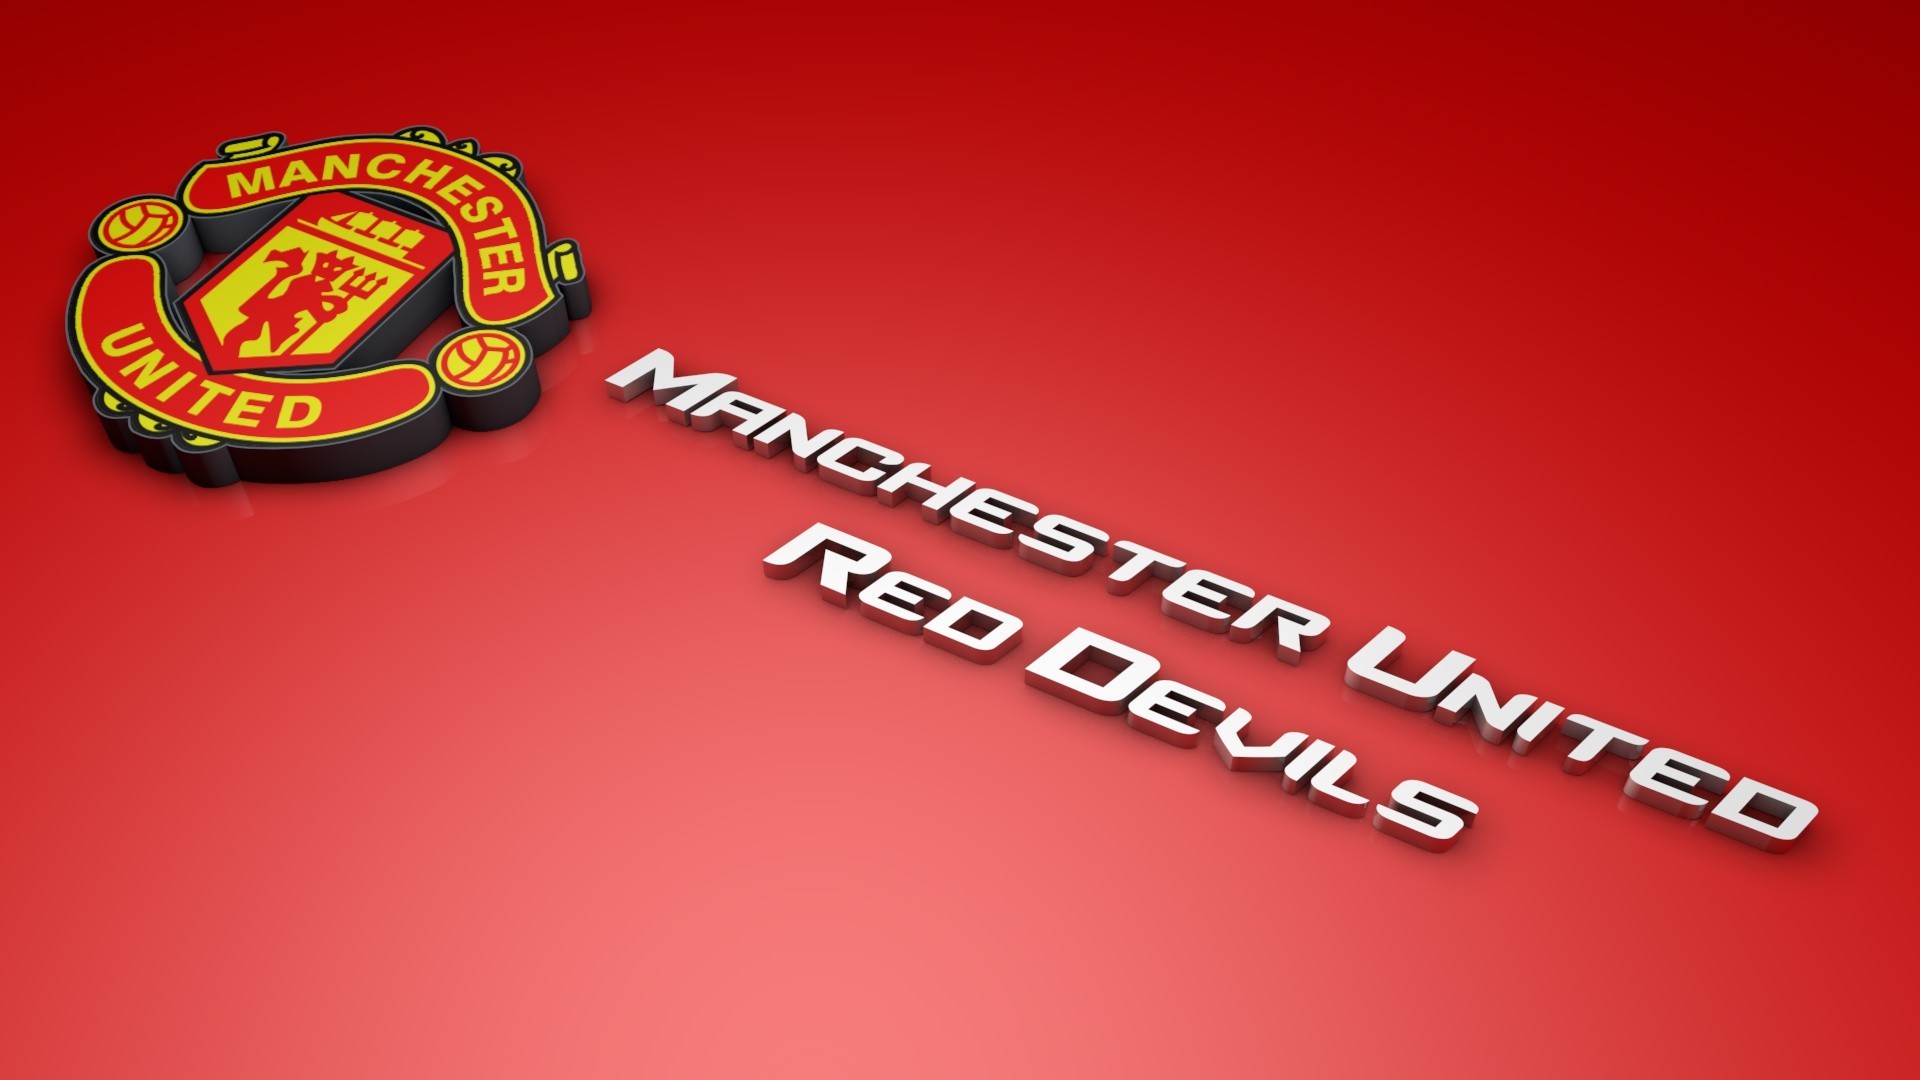 1920x1080 ... Manchester united FC background 1 ...